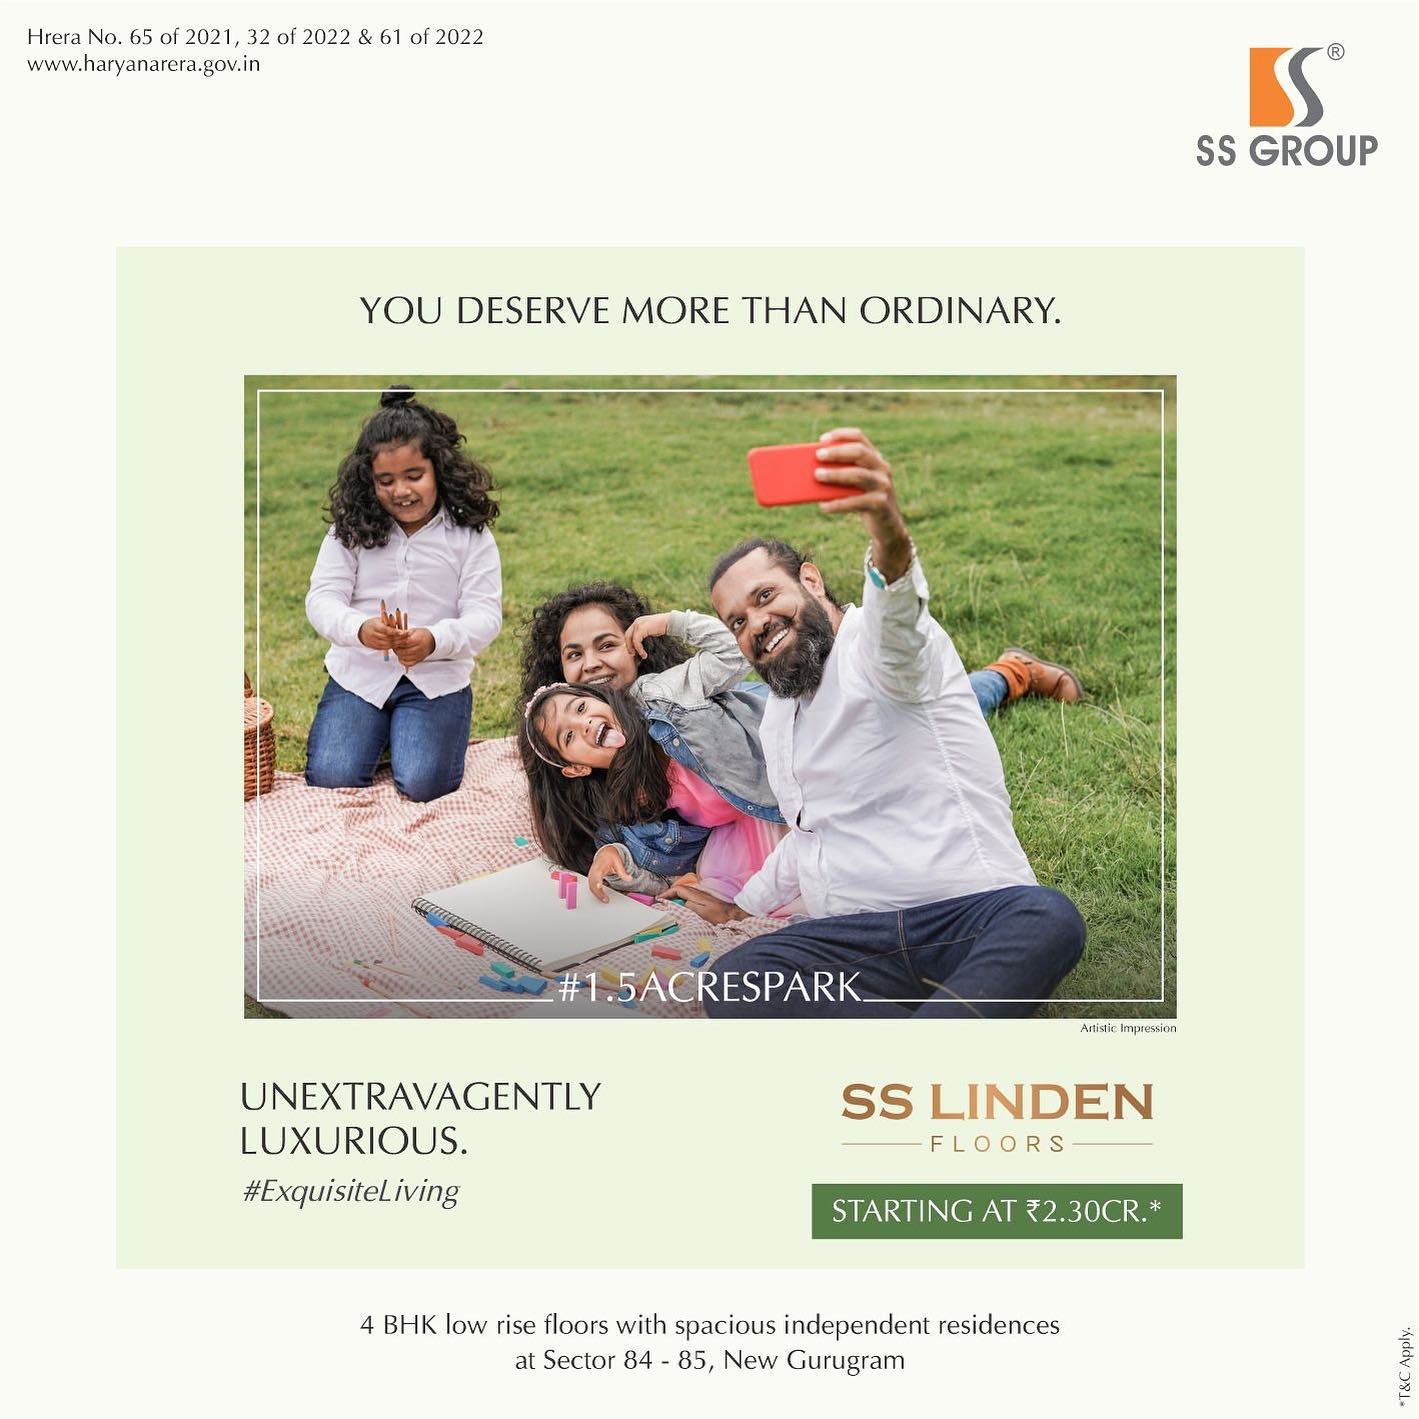 Discover the beauty of outdoors where you connect with nature’s wonders at SS Linden Floors in Sector 84, Gurgaon Update